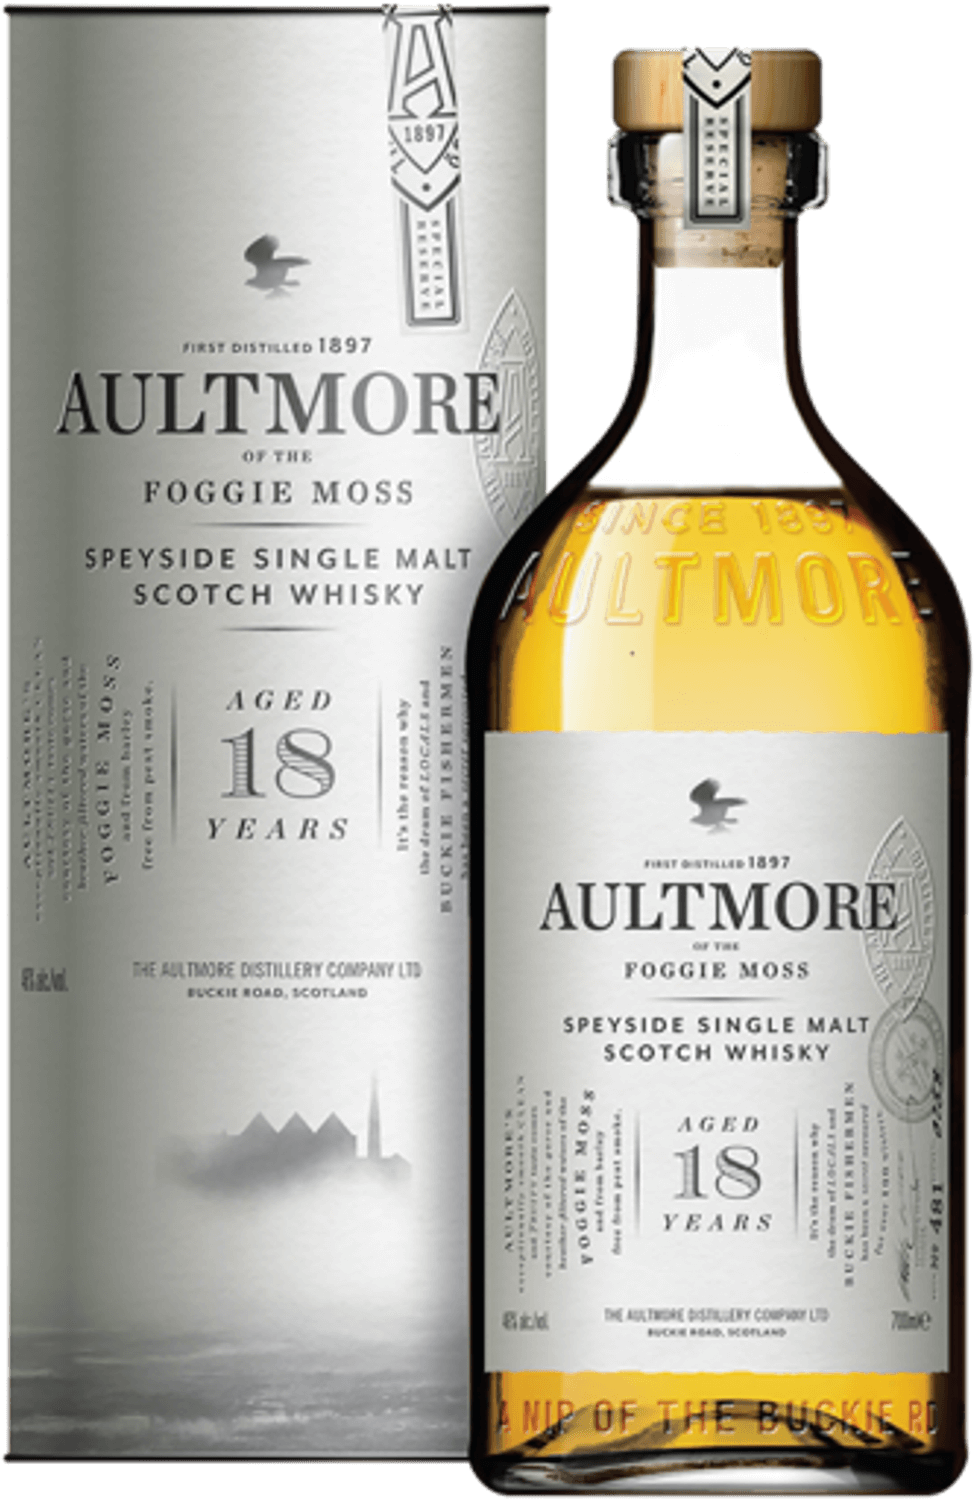 Aultmore 18 Years Old Speyside Single Malt Scotch Whisky (gift box)